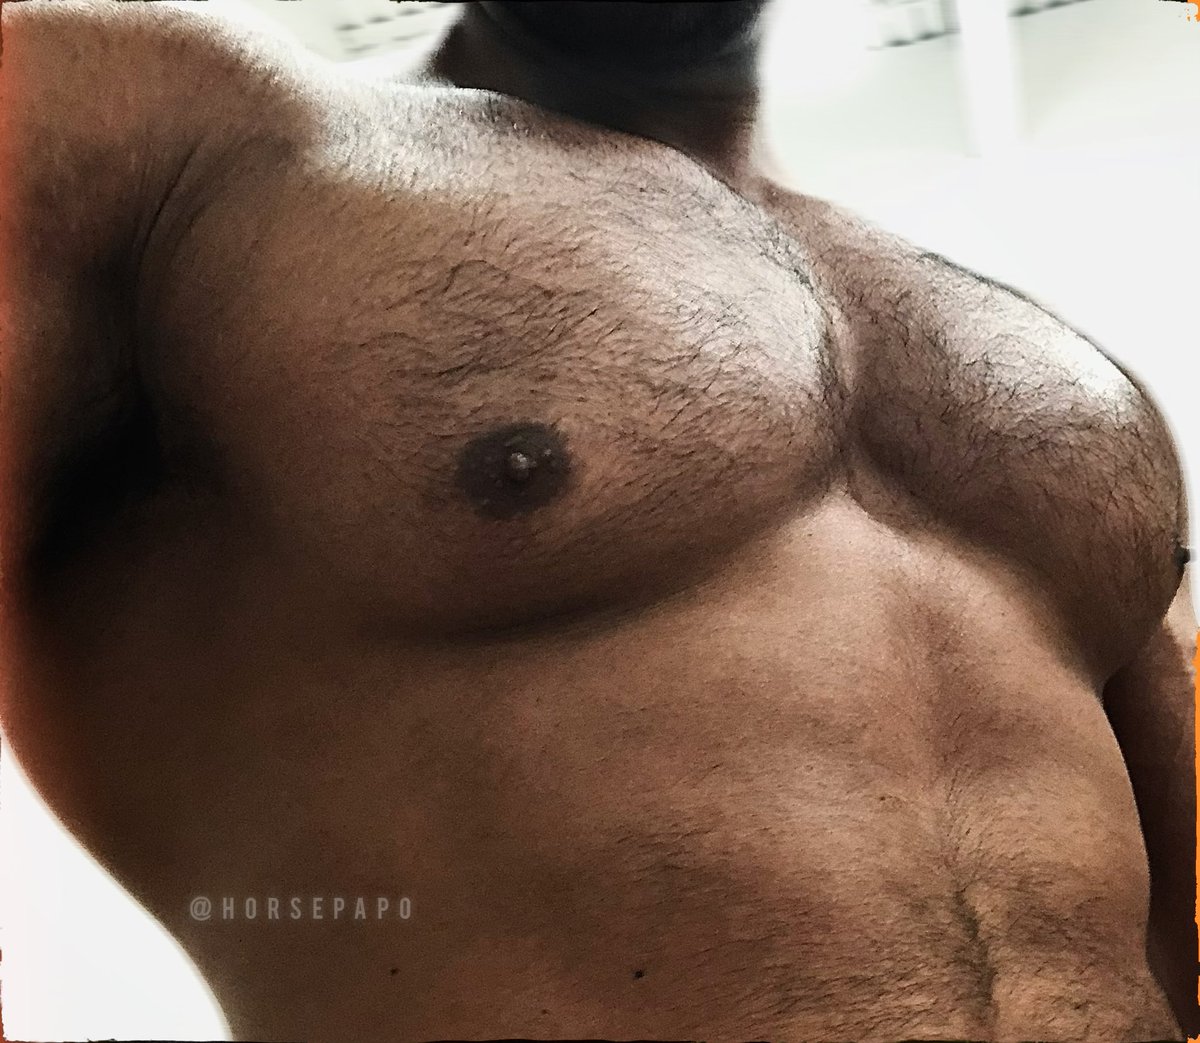 Which tastes better? 👅 𝘰𝘳 B. Hairy Tits